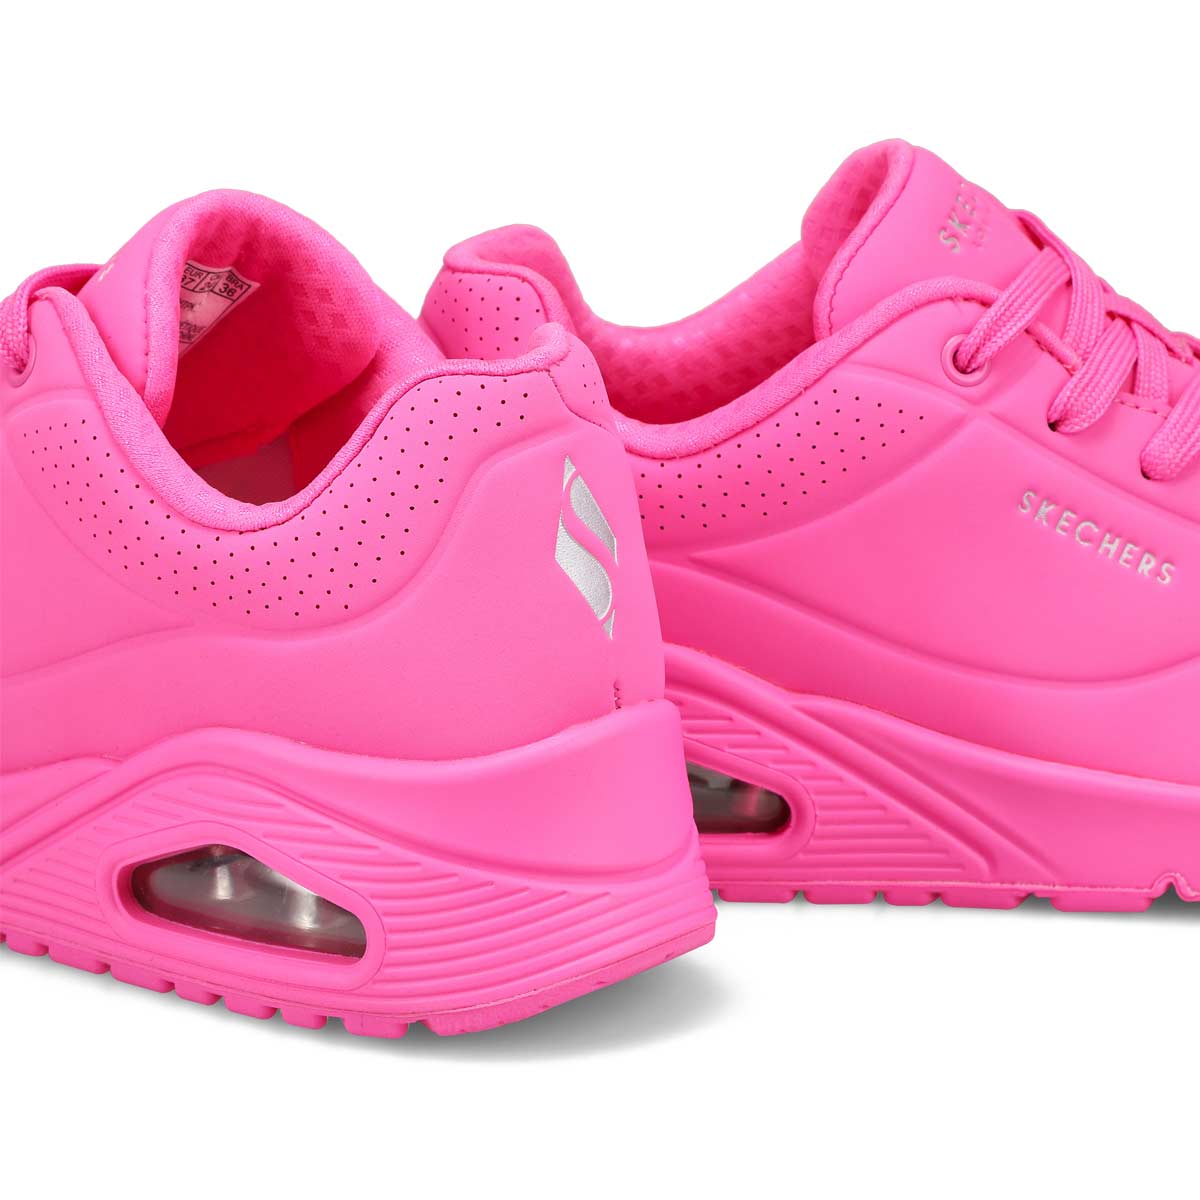 Women's Uno Stand On Air Sneaker - Hot Pink